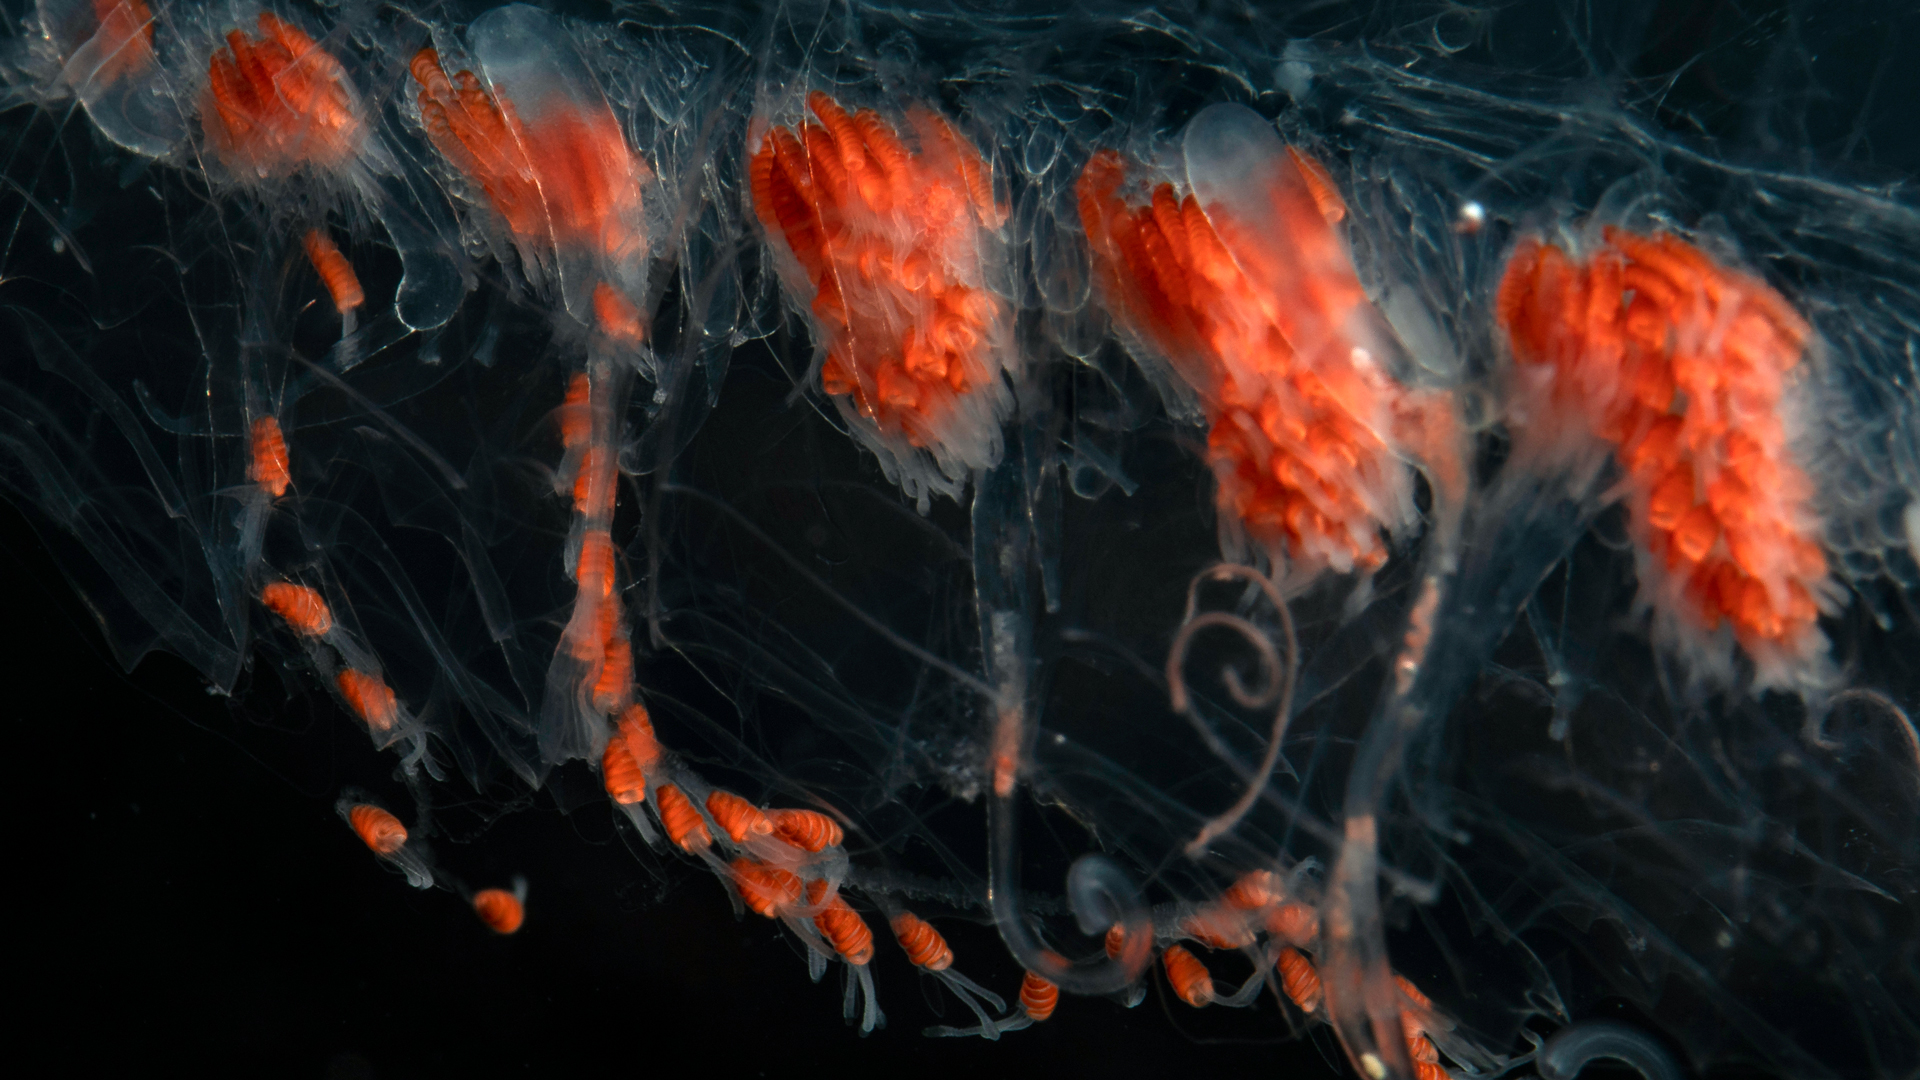 Siphonophore tentacles